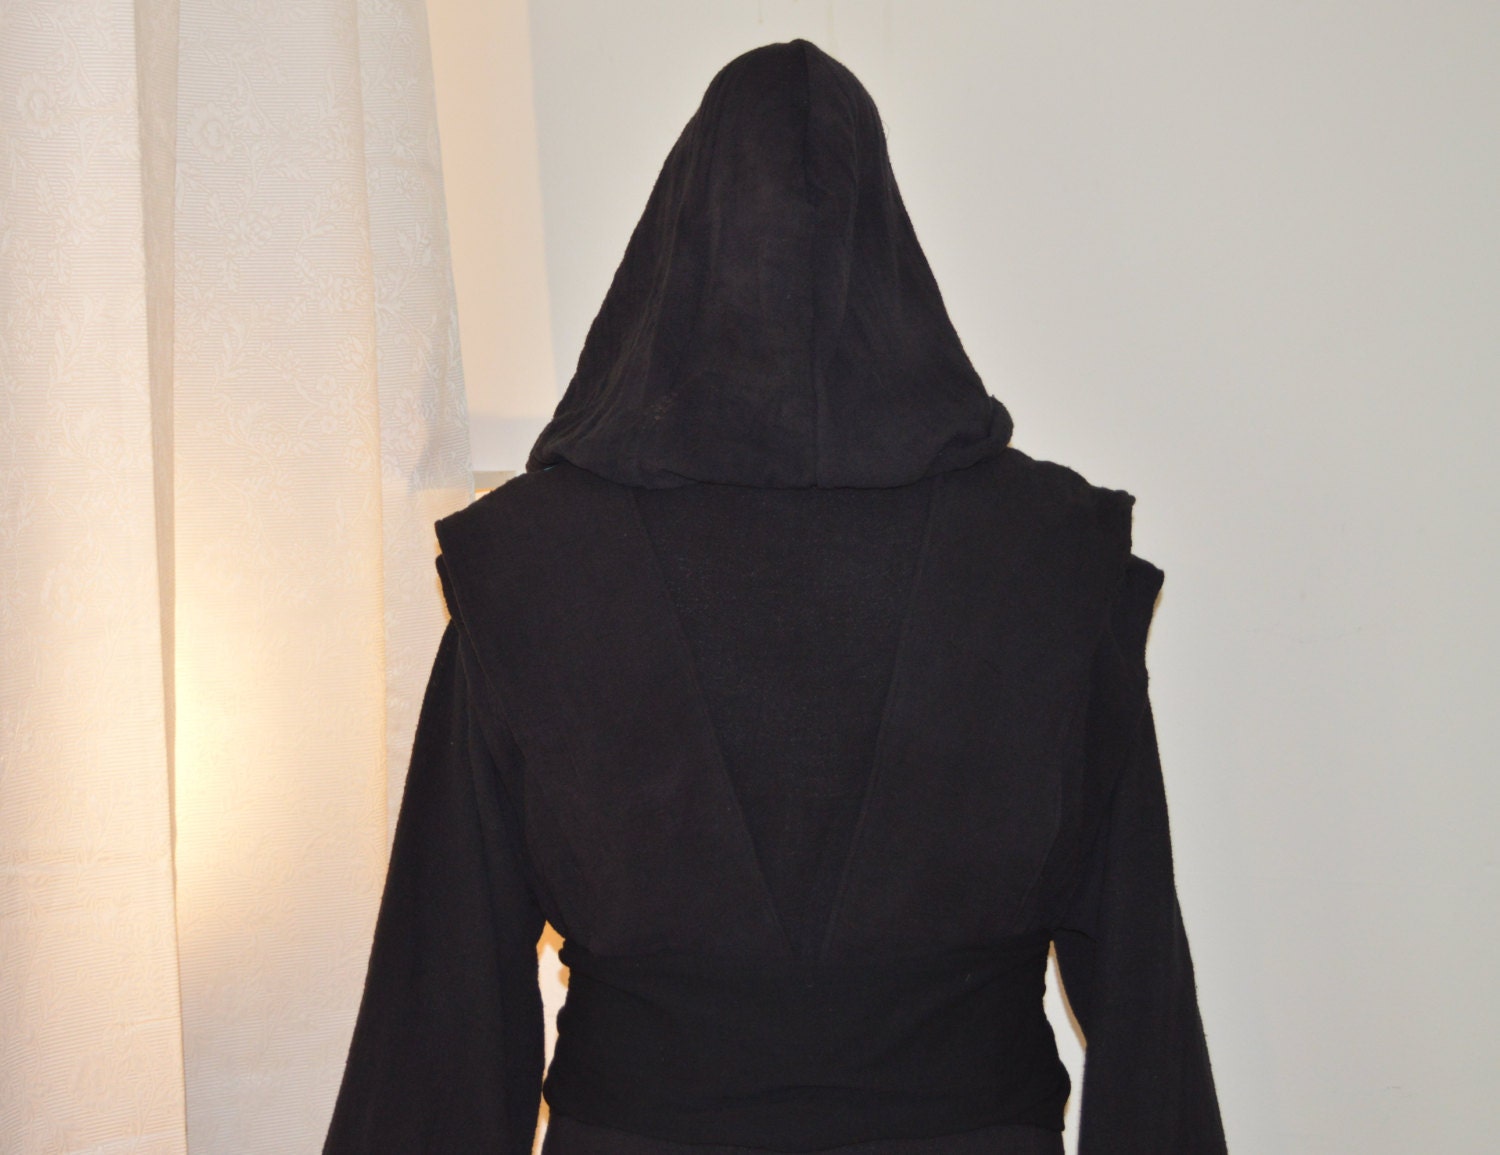 Star Wars dark side Sith tunic outfit inspiration made to order dress